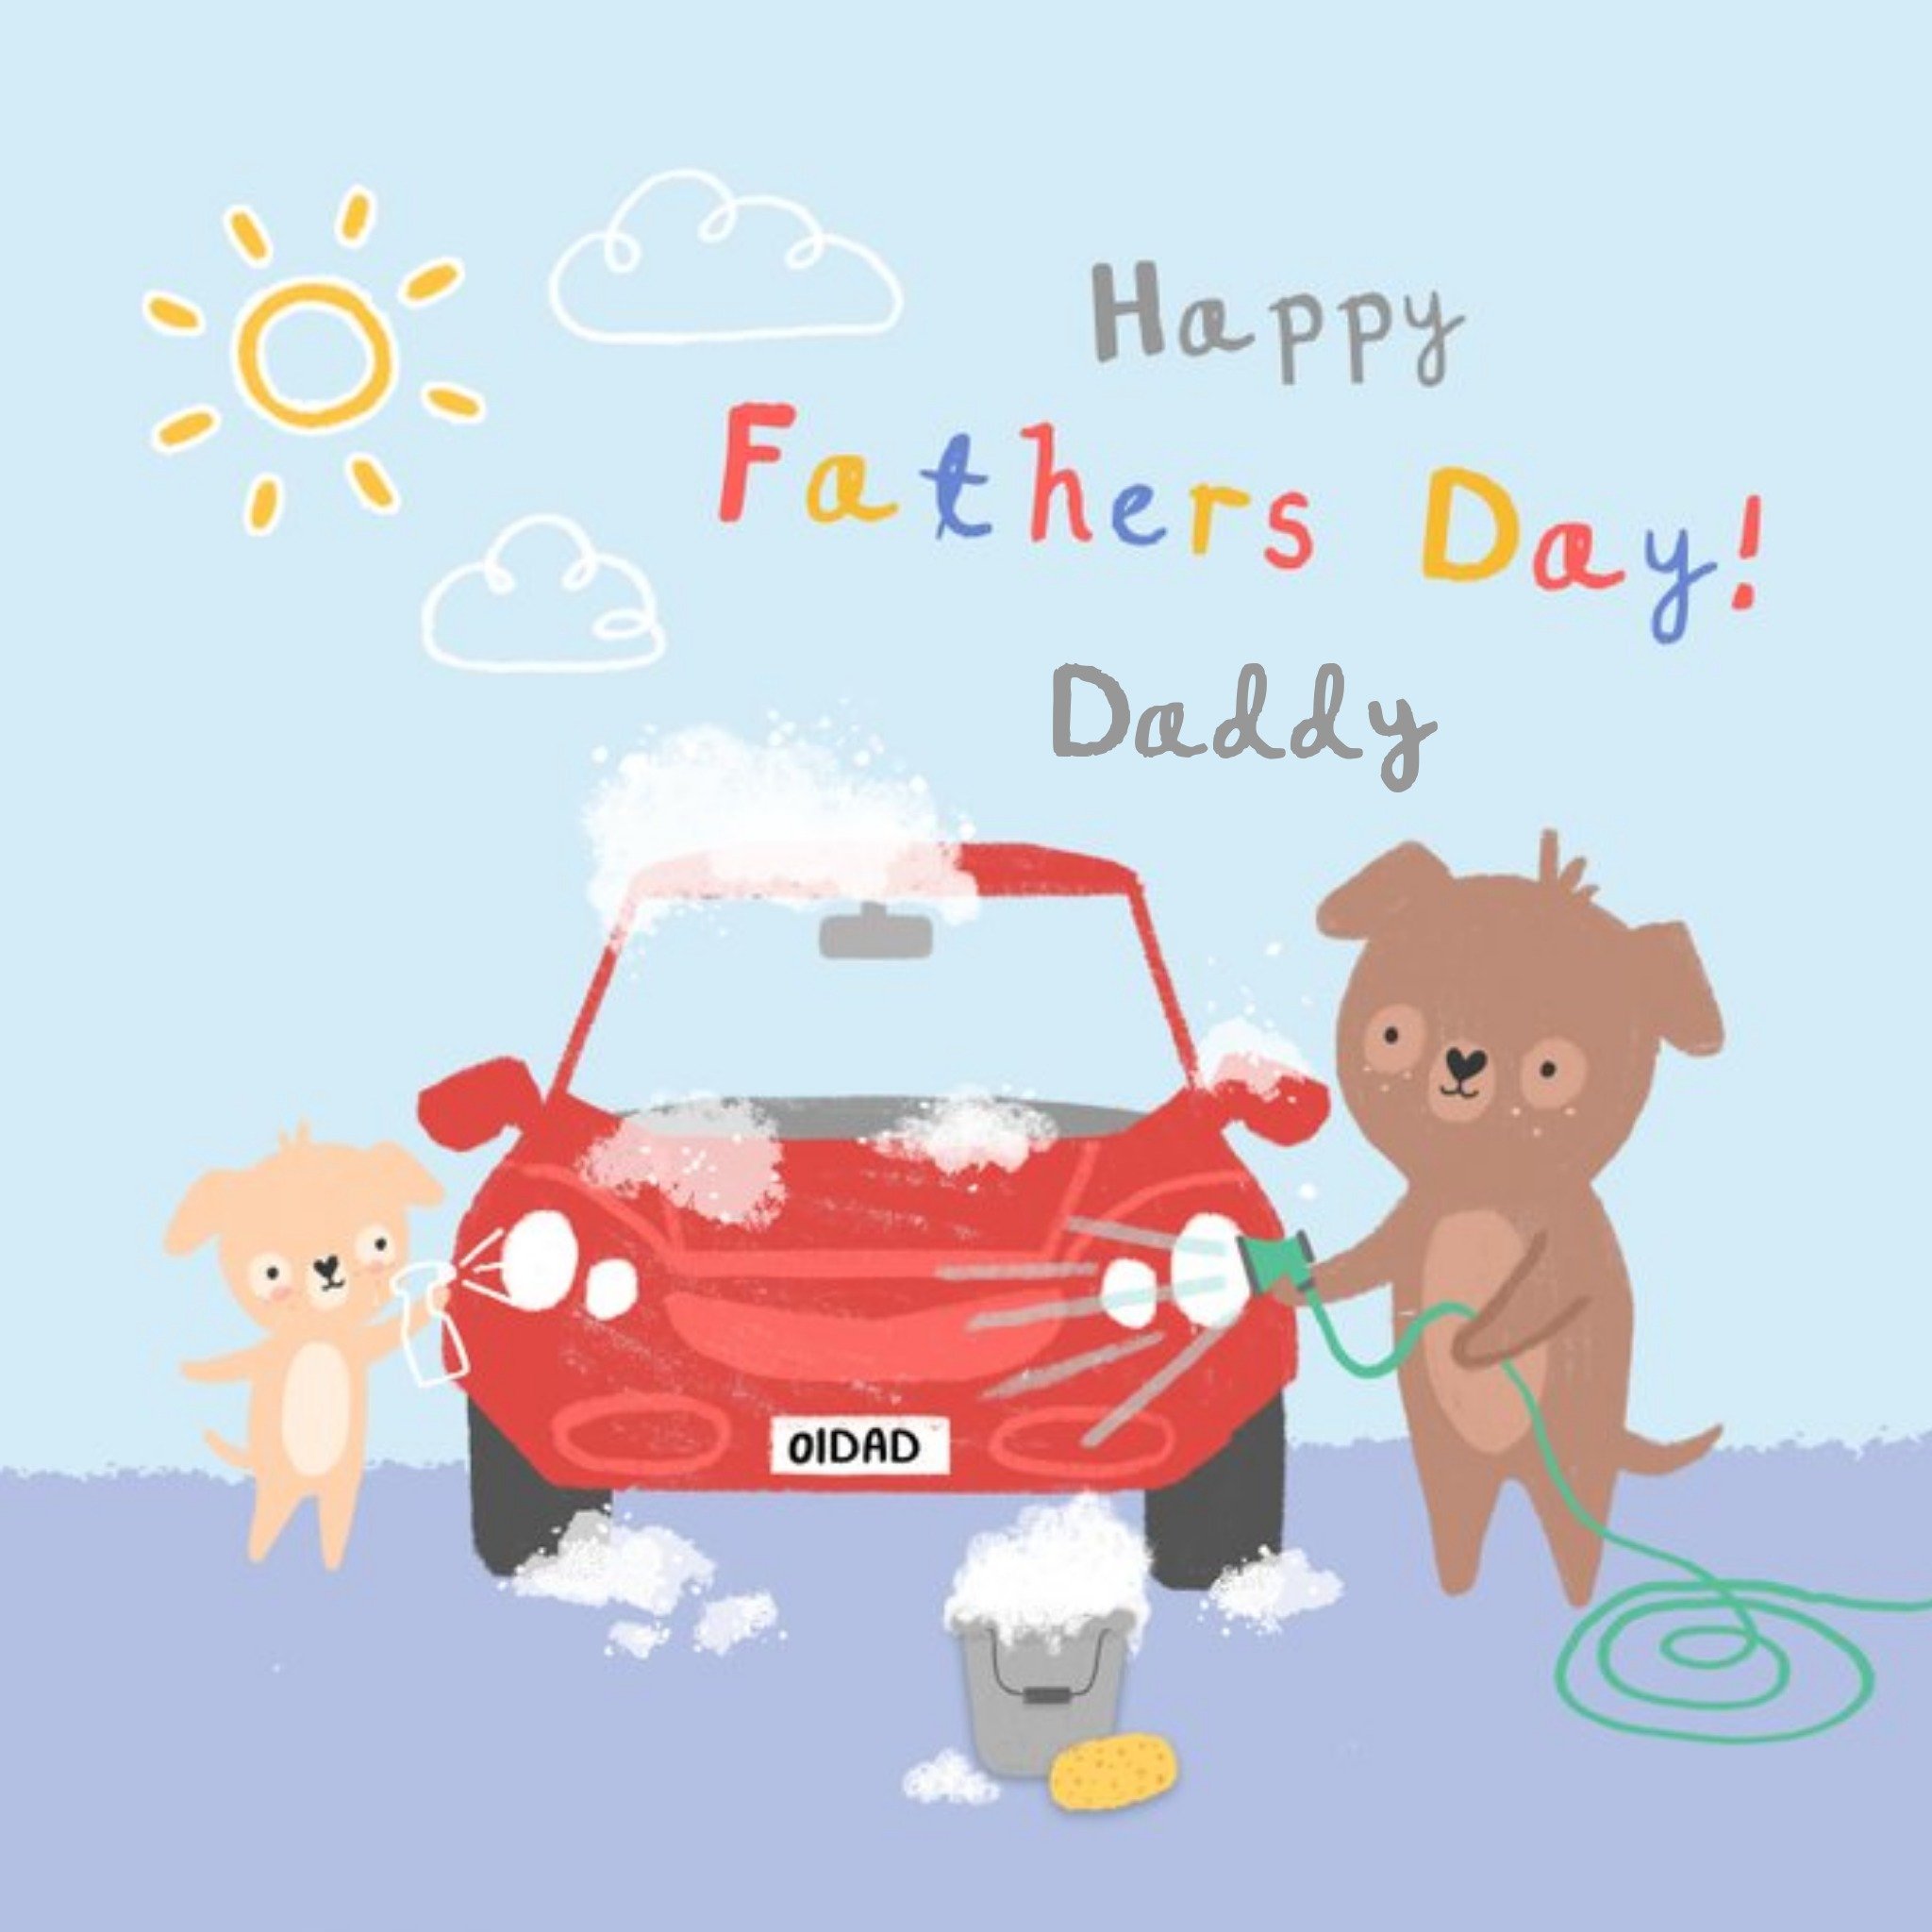 Moonpig Illustration Of Dogs Washing A Car Father's Day Card, Square